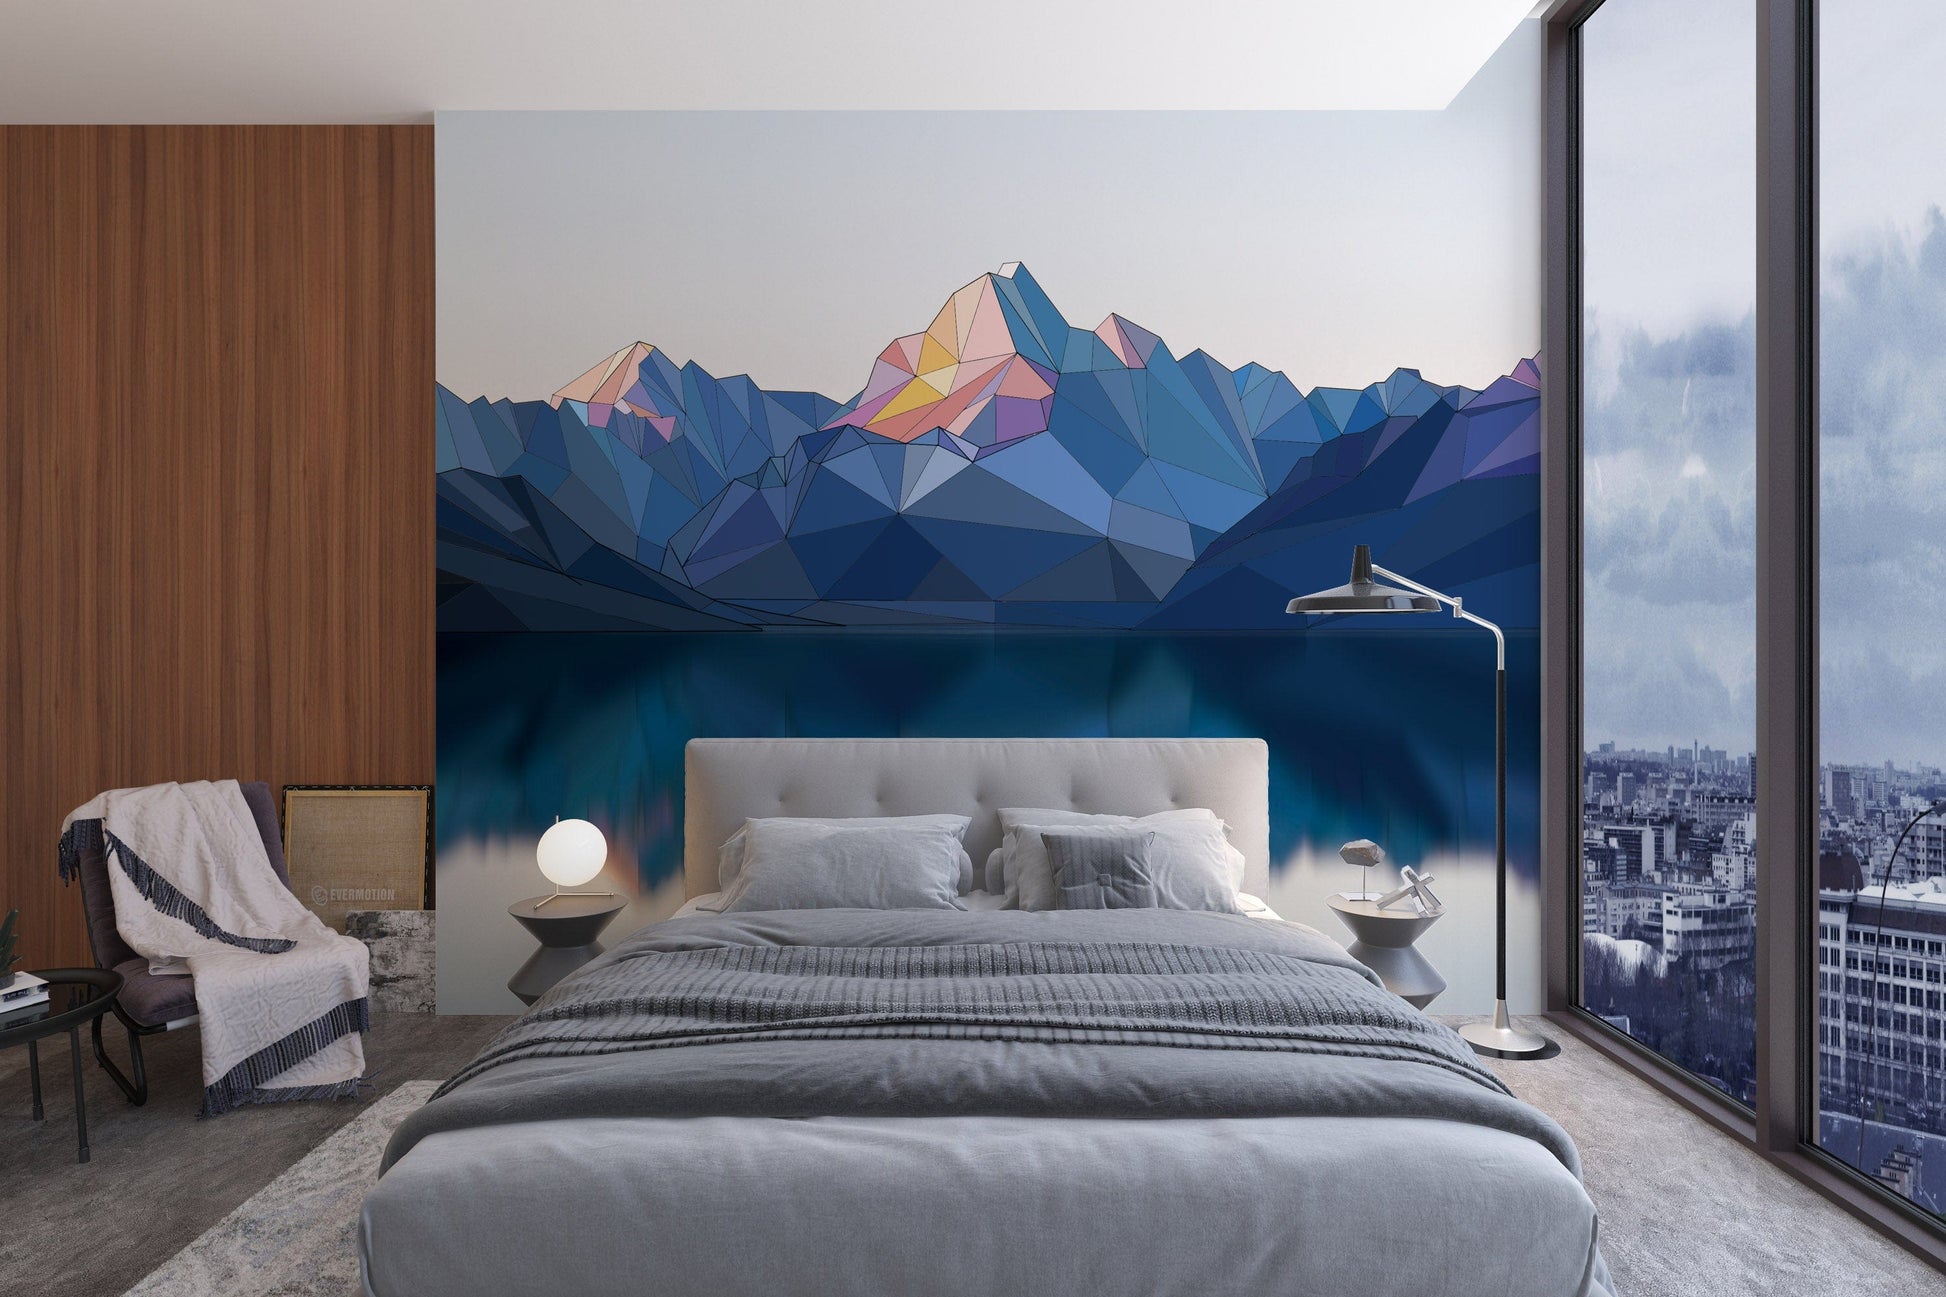 3D Mountain Peaks Wallpaper Mural for Use as Decorating Material in Bedrooms